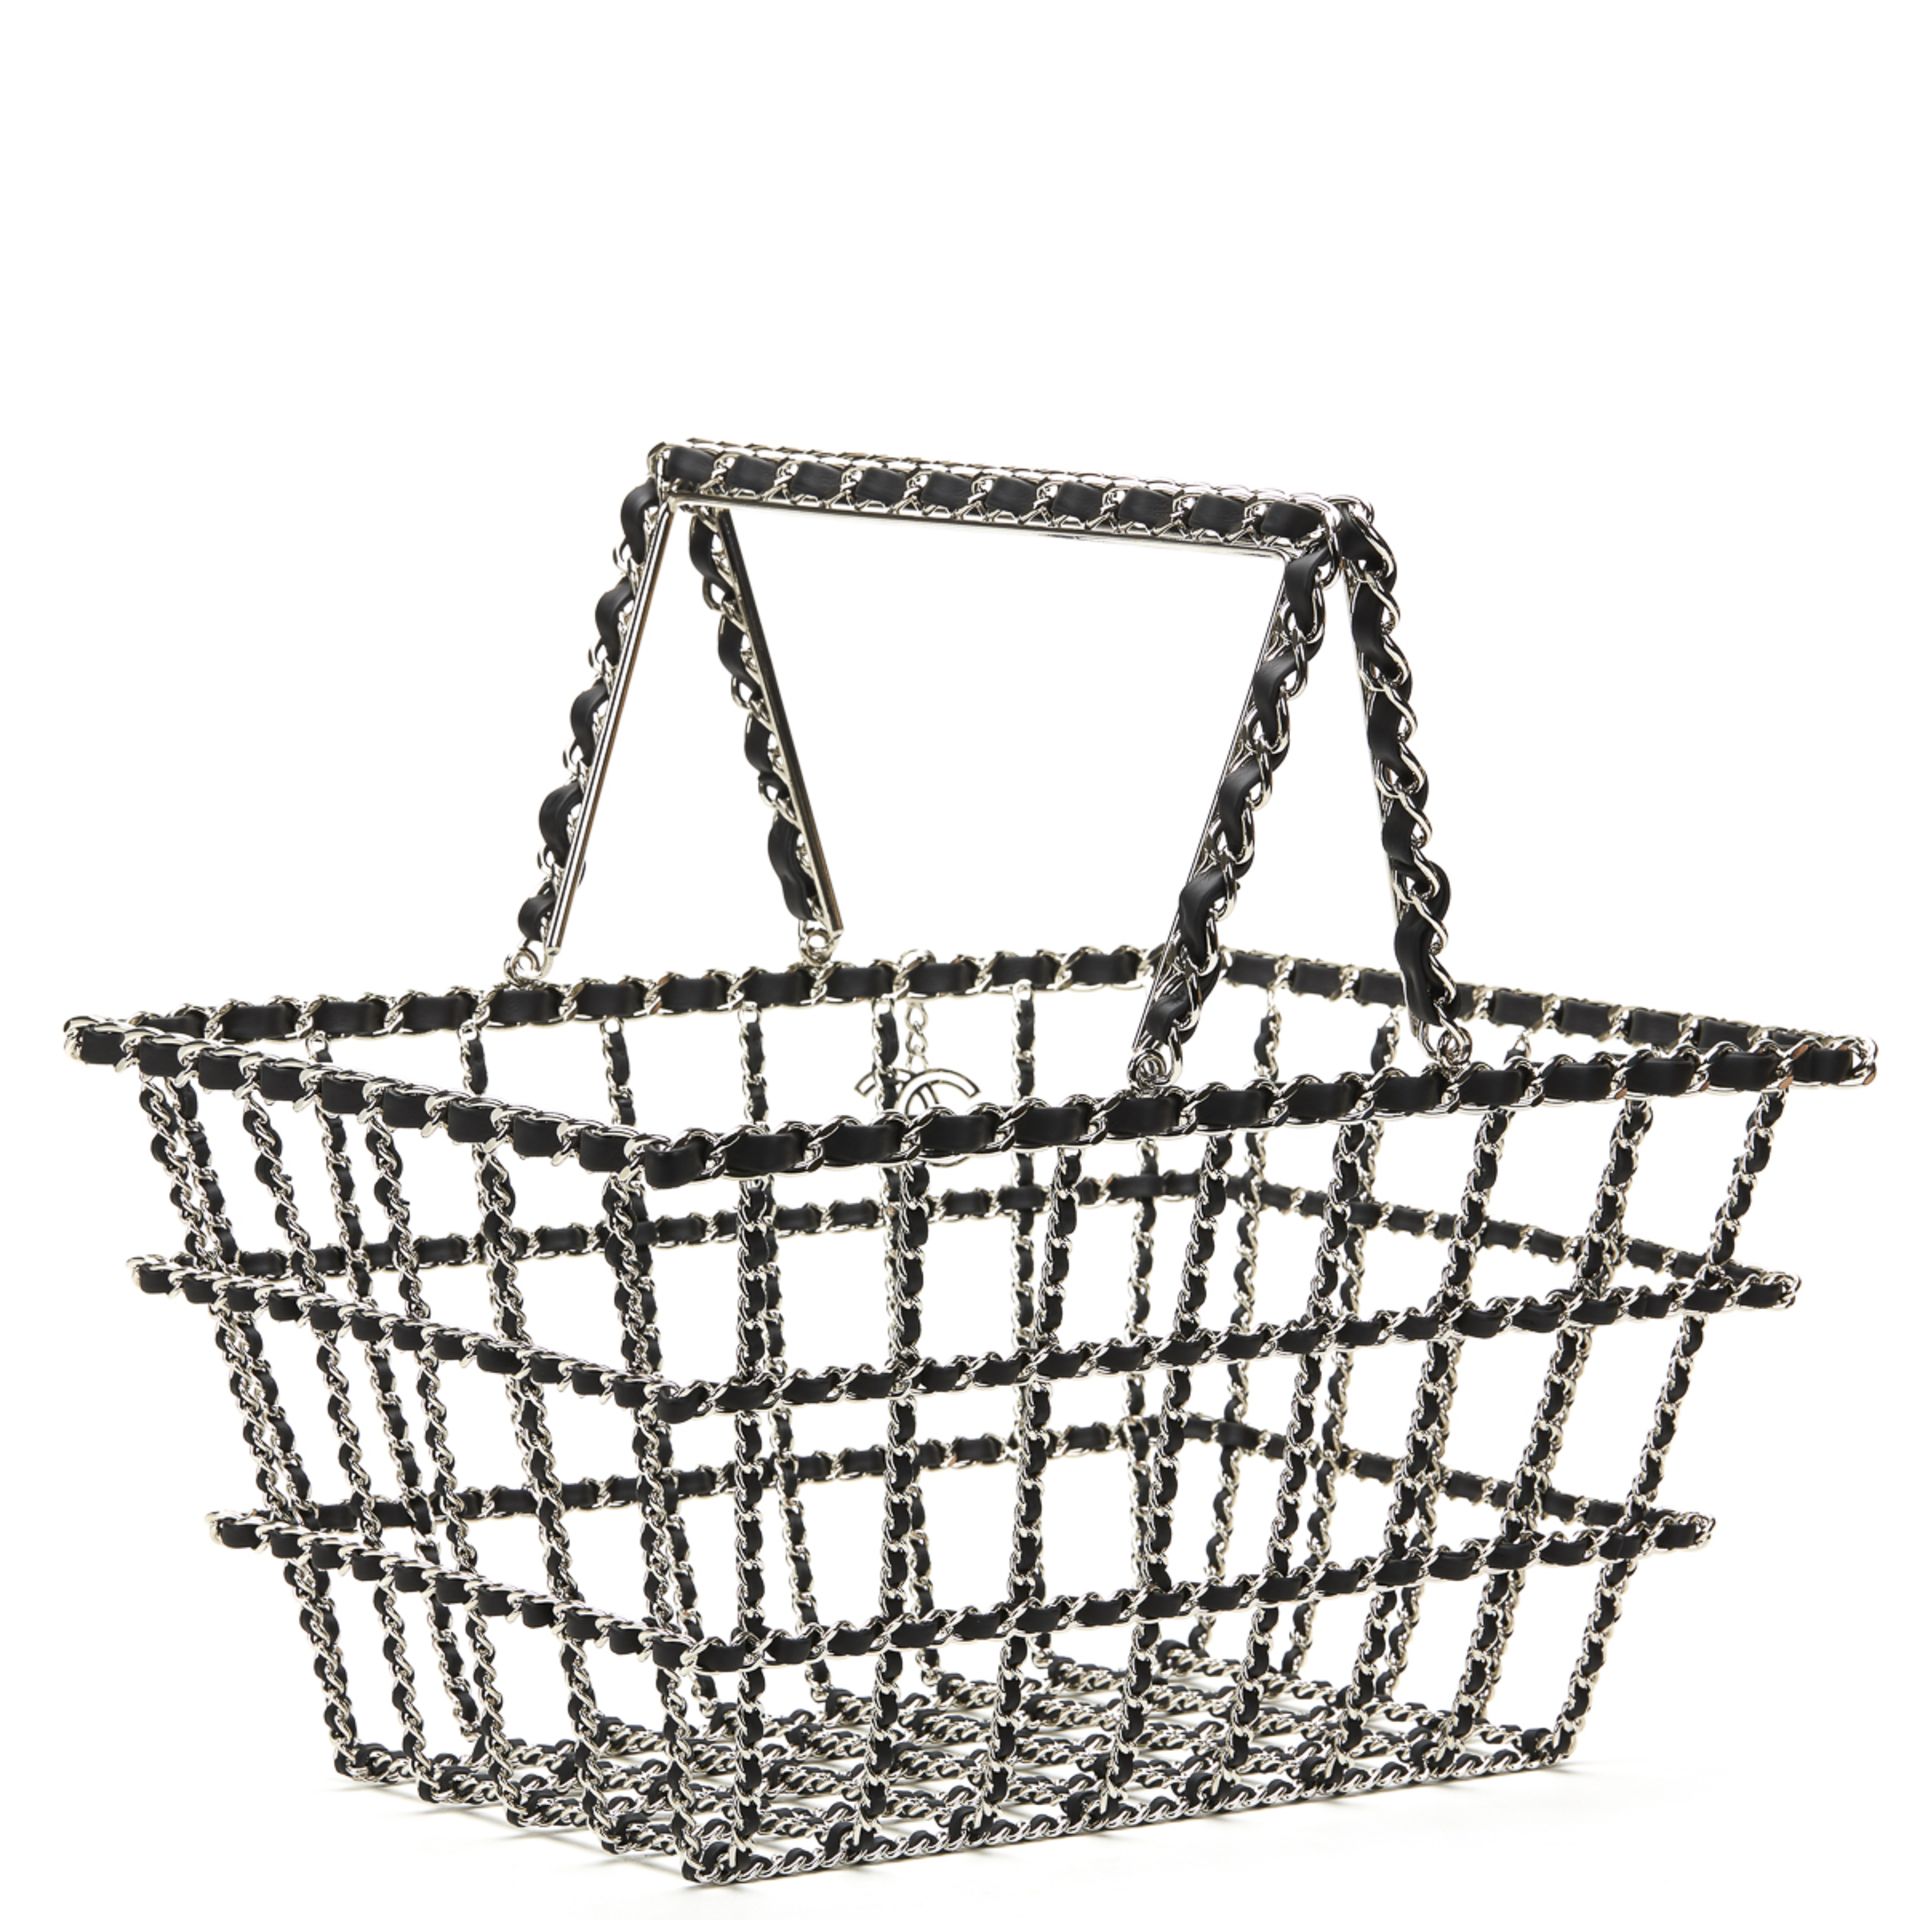 Silver & Black Calfskin Leather Fall 2014 Act 2 Basket Bag - Image 3 of 9